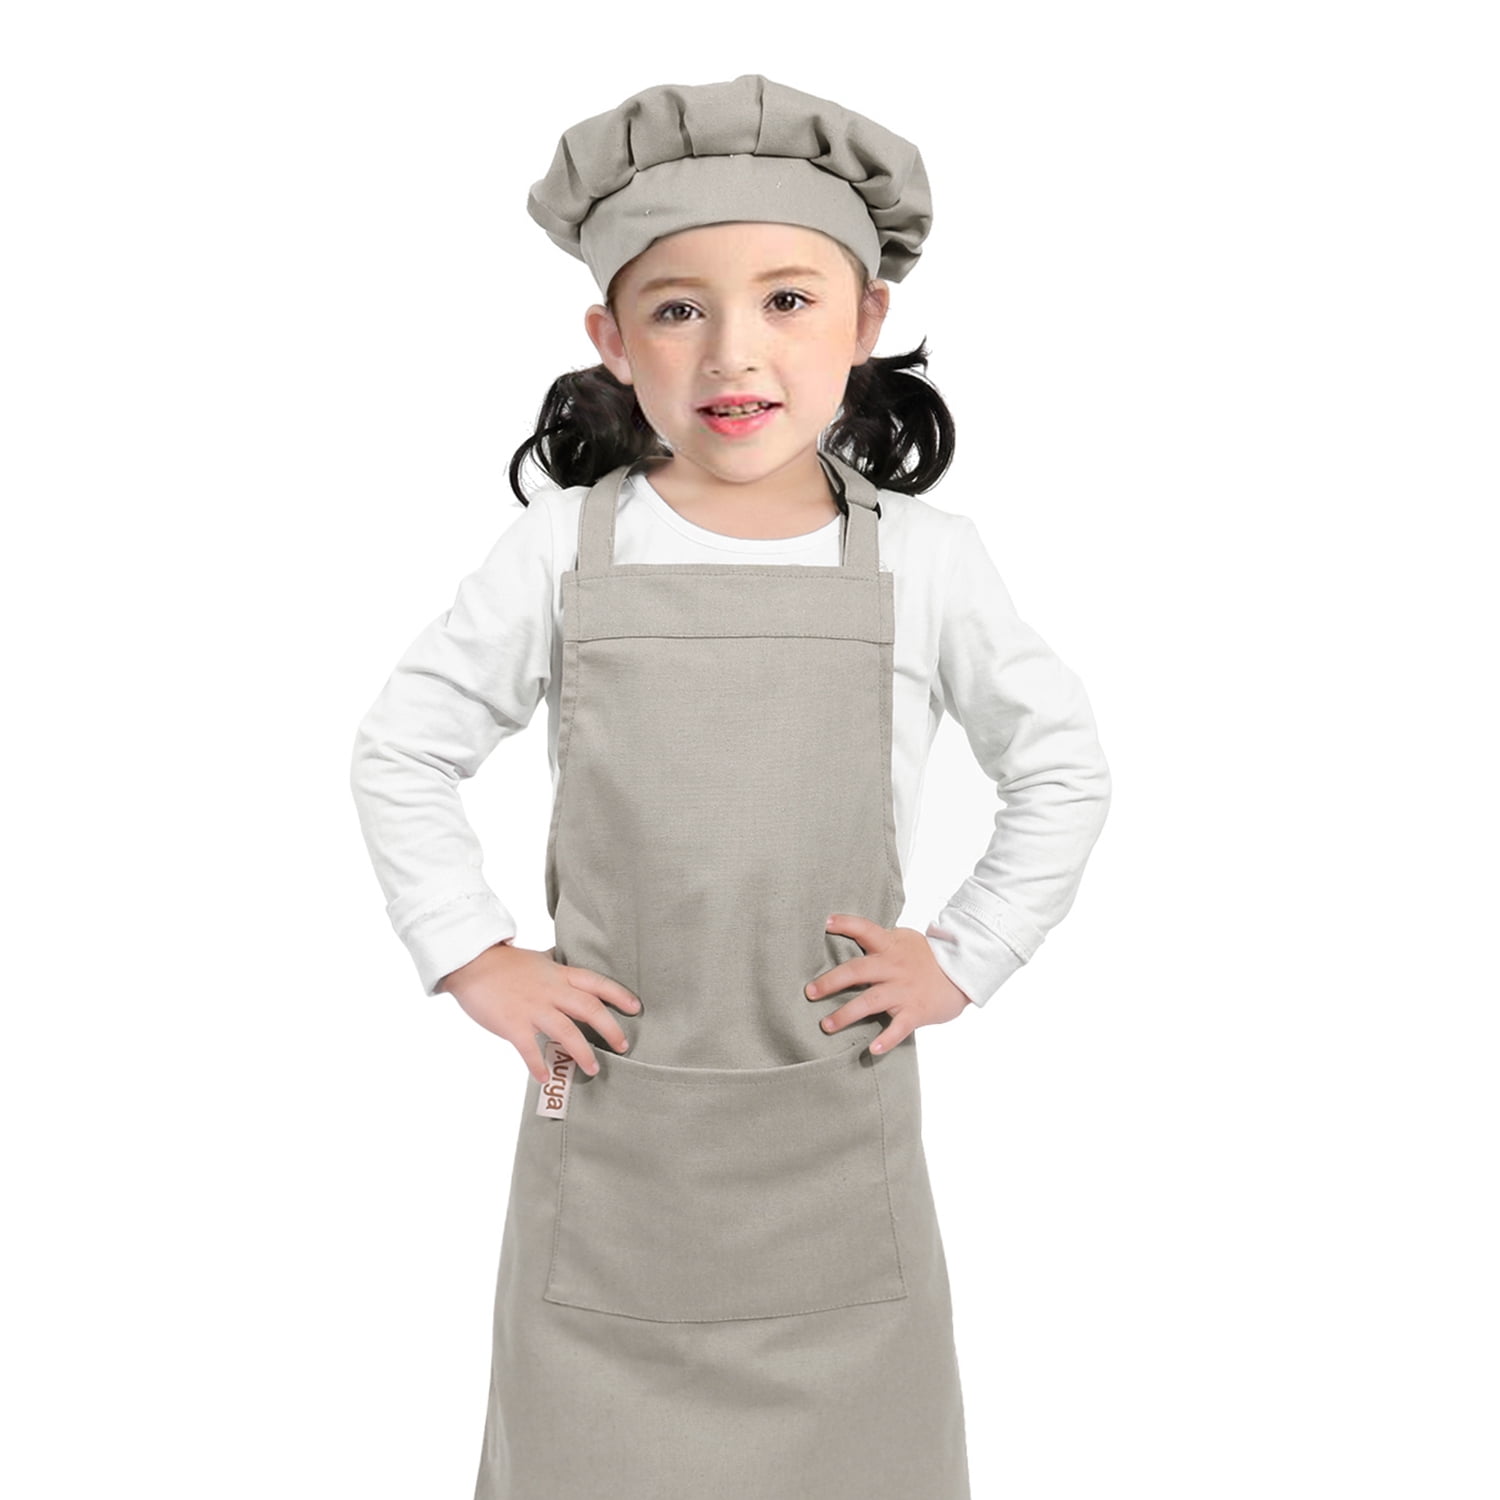 Kids Apron and Chef Hat Set-Adjustable Child Apron for Boys and Girls Aged 6-14